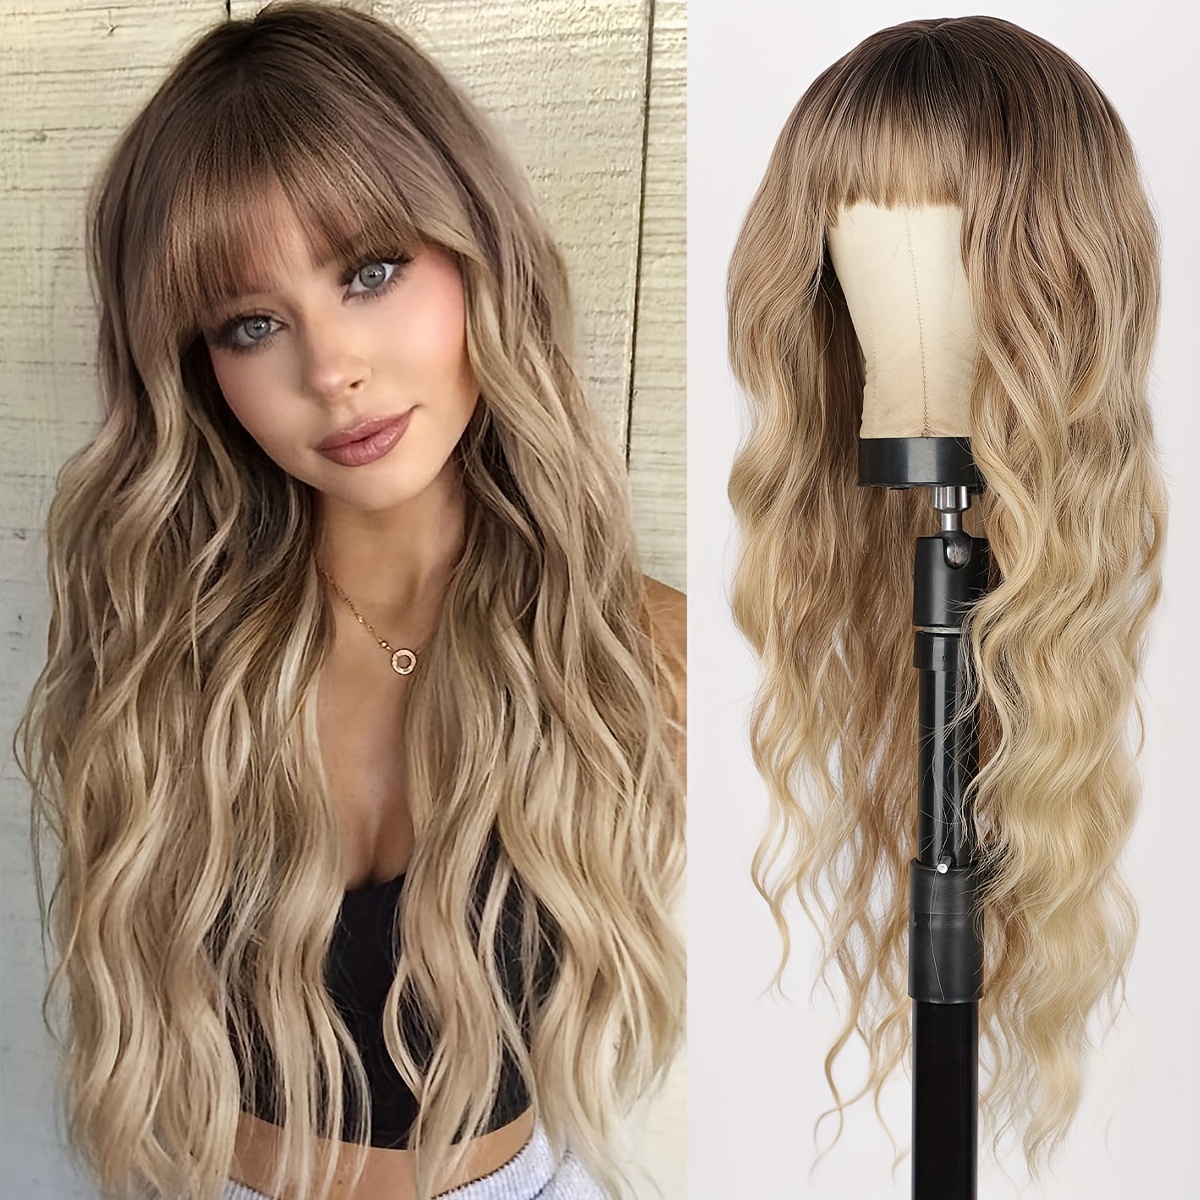 

Blonde Wig With Bangs Long Wavy Curly Ombre Wig With Dark Root Synthetic Heat Resistant Wigs For Women Daily Party Use 26 Inches